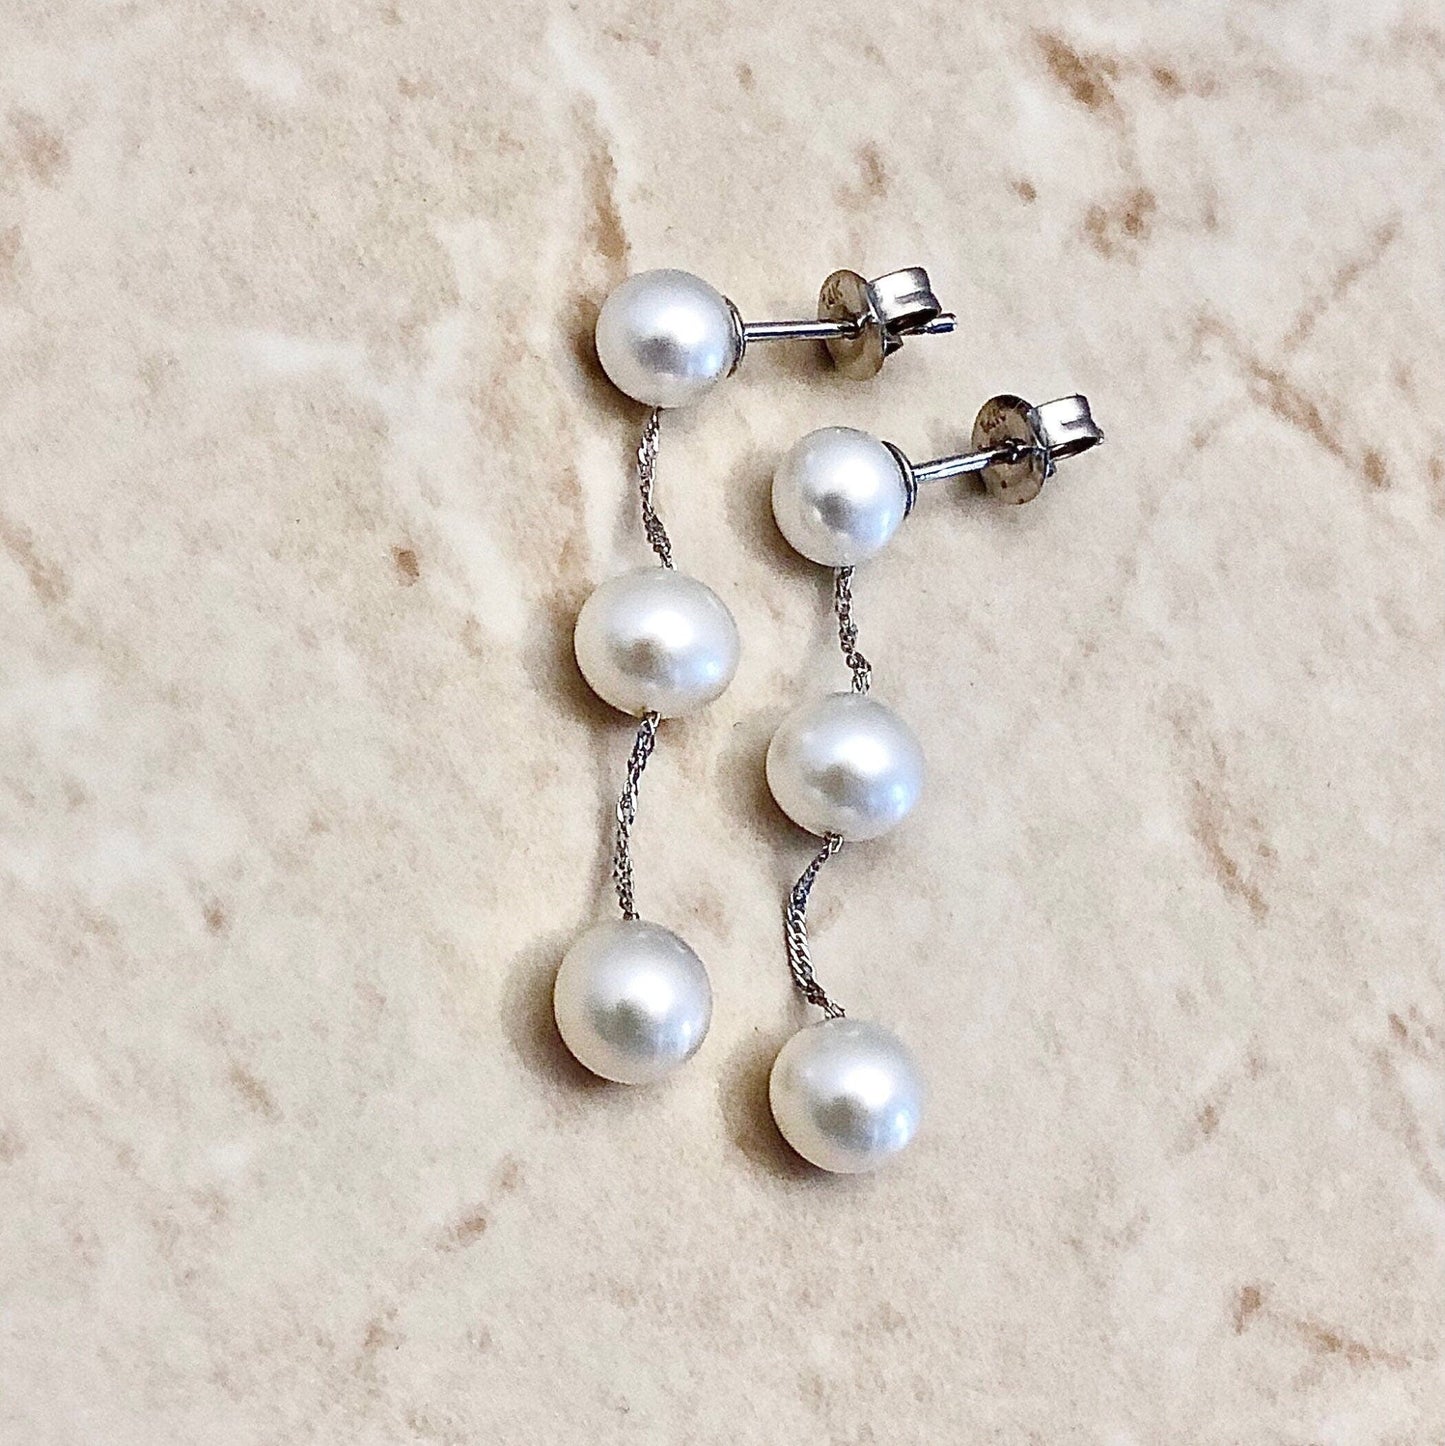 14K Tin Cup Pearl Drop Earrings - White Gold Genuine Pearl Earrings - Birthday Gift - June Birthstone - Best Gift For Her - Jewelry Sale